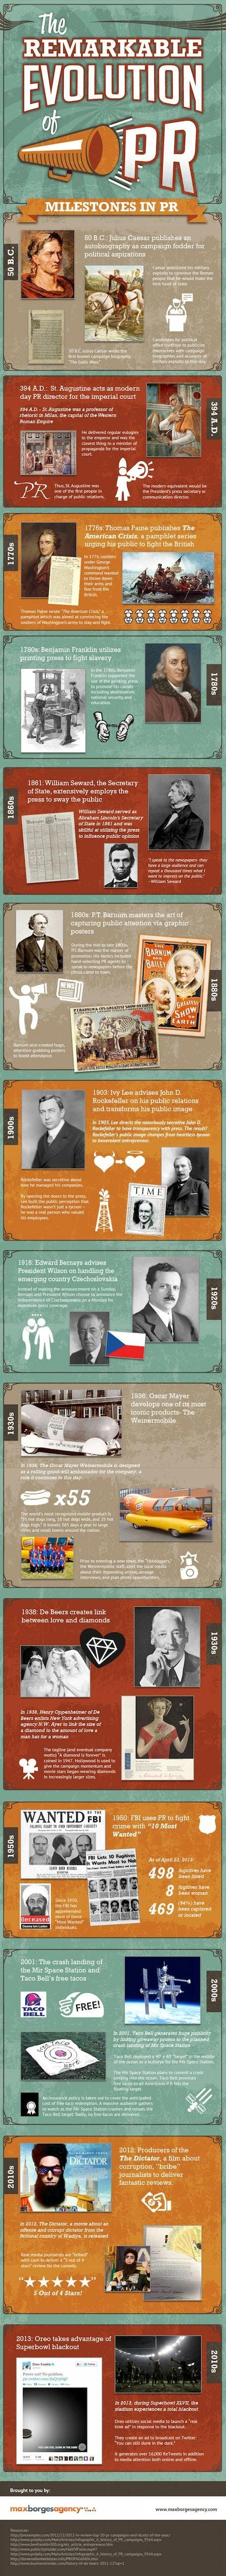 Infographic the history of public relations